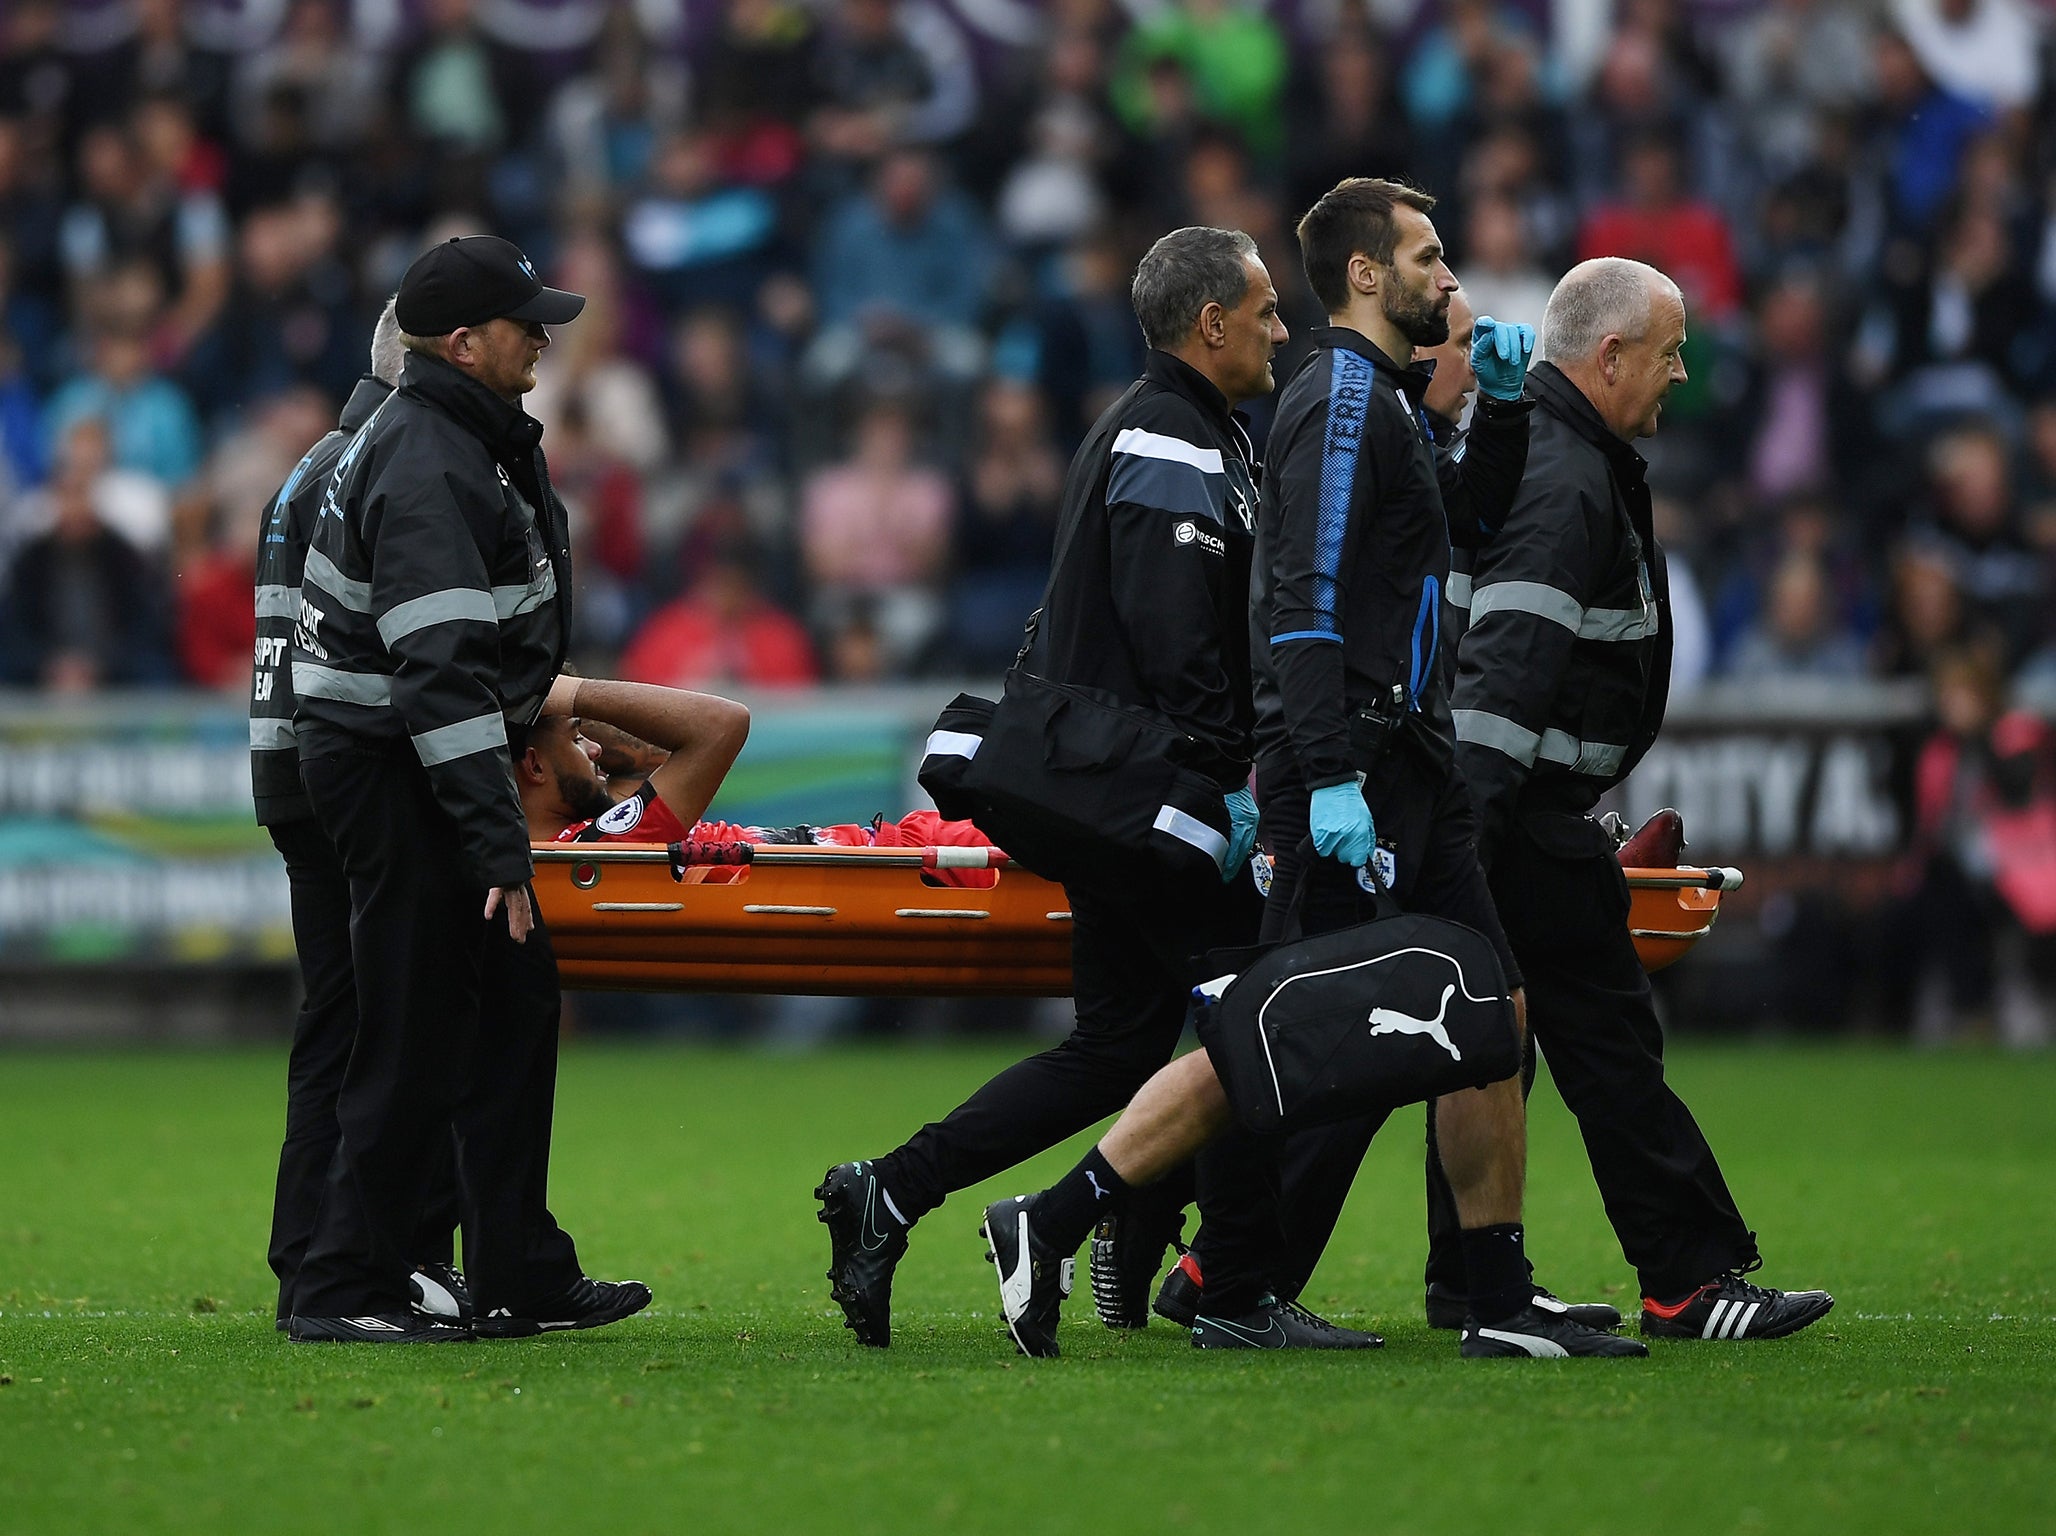 Williams was stretchered off for Huddersfield